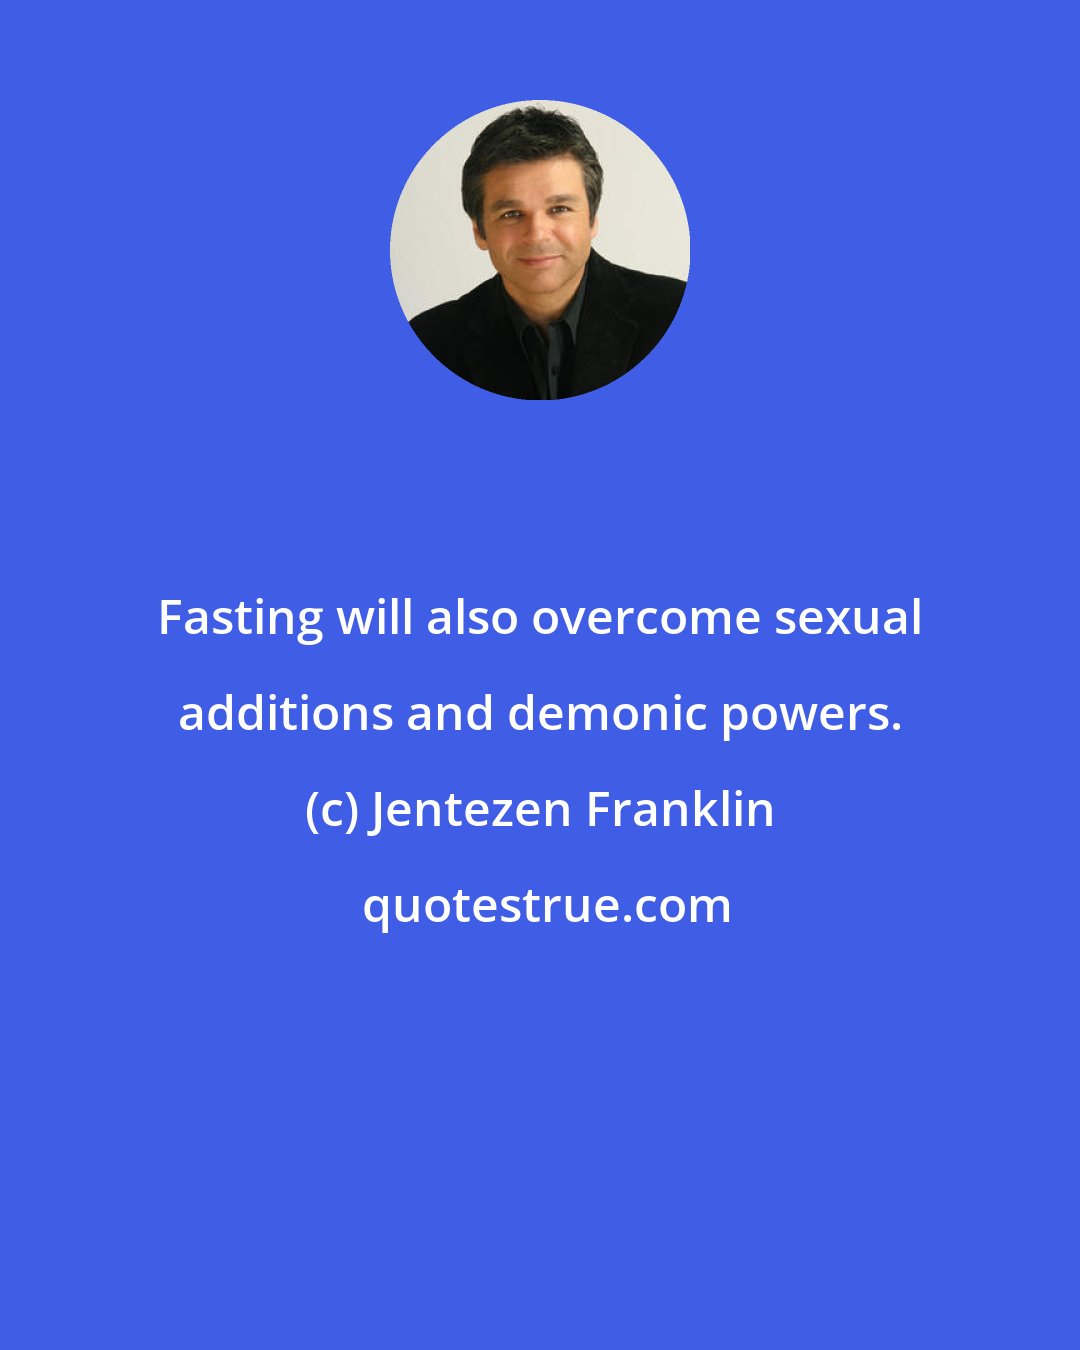 Jentezen Franklin: Fasting will also overcome sexual additions and demonic powers.